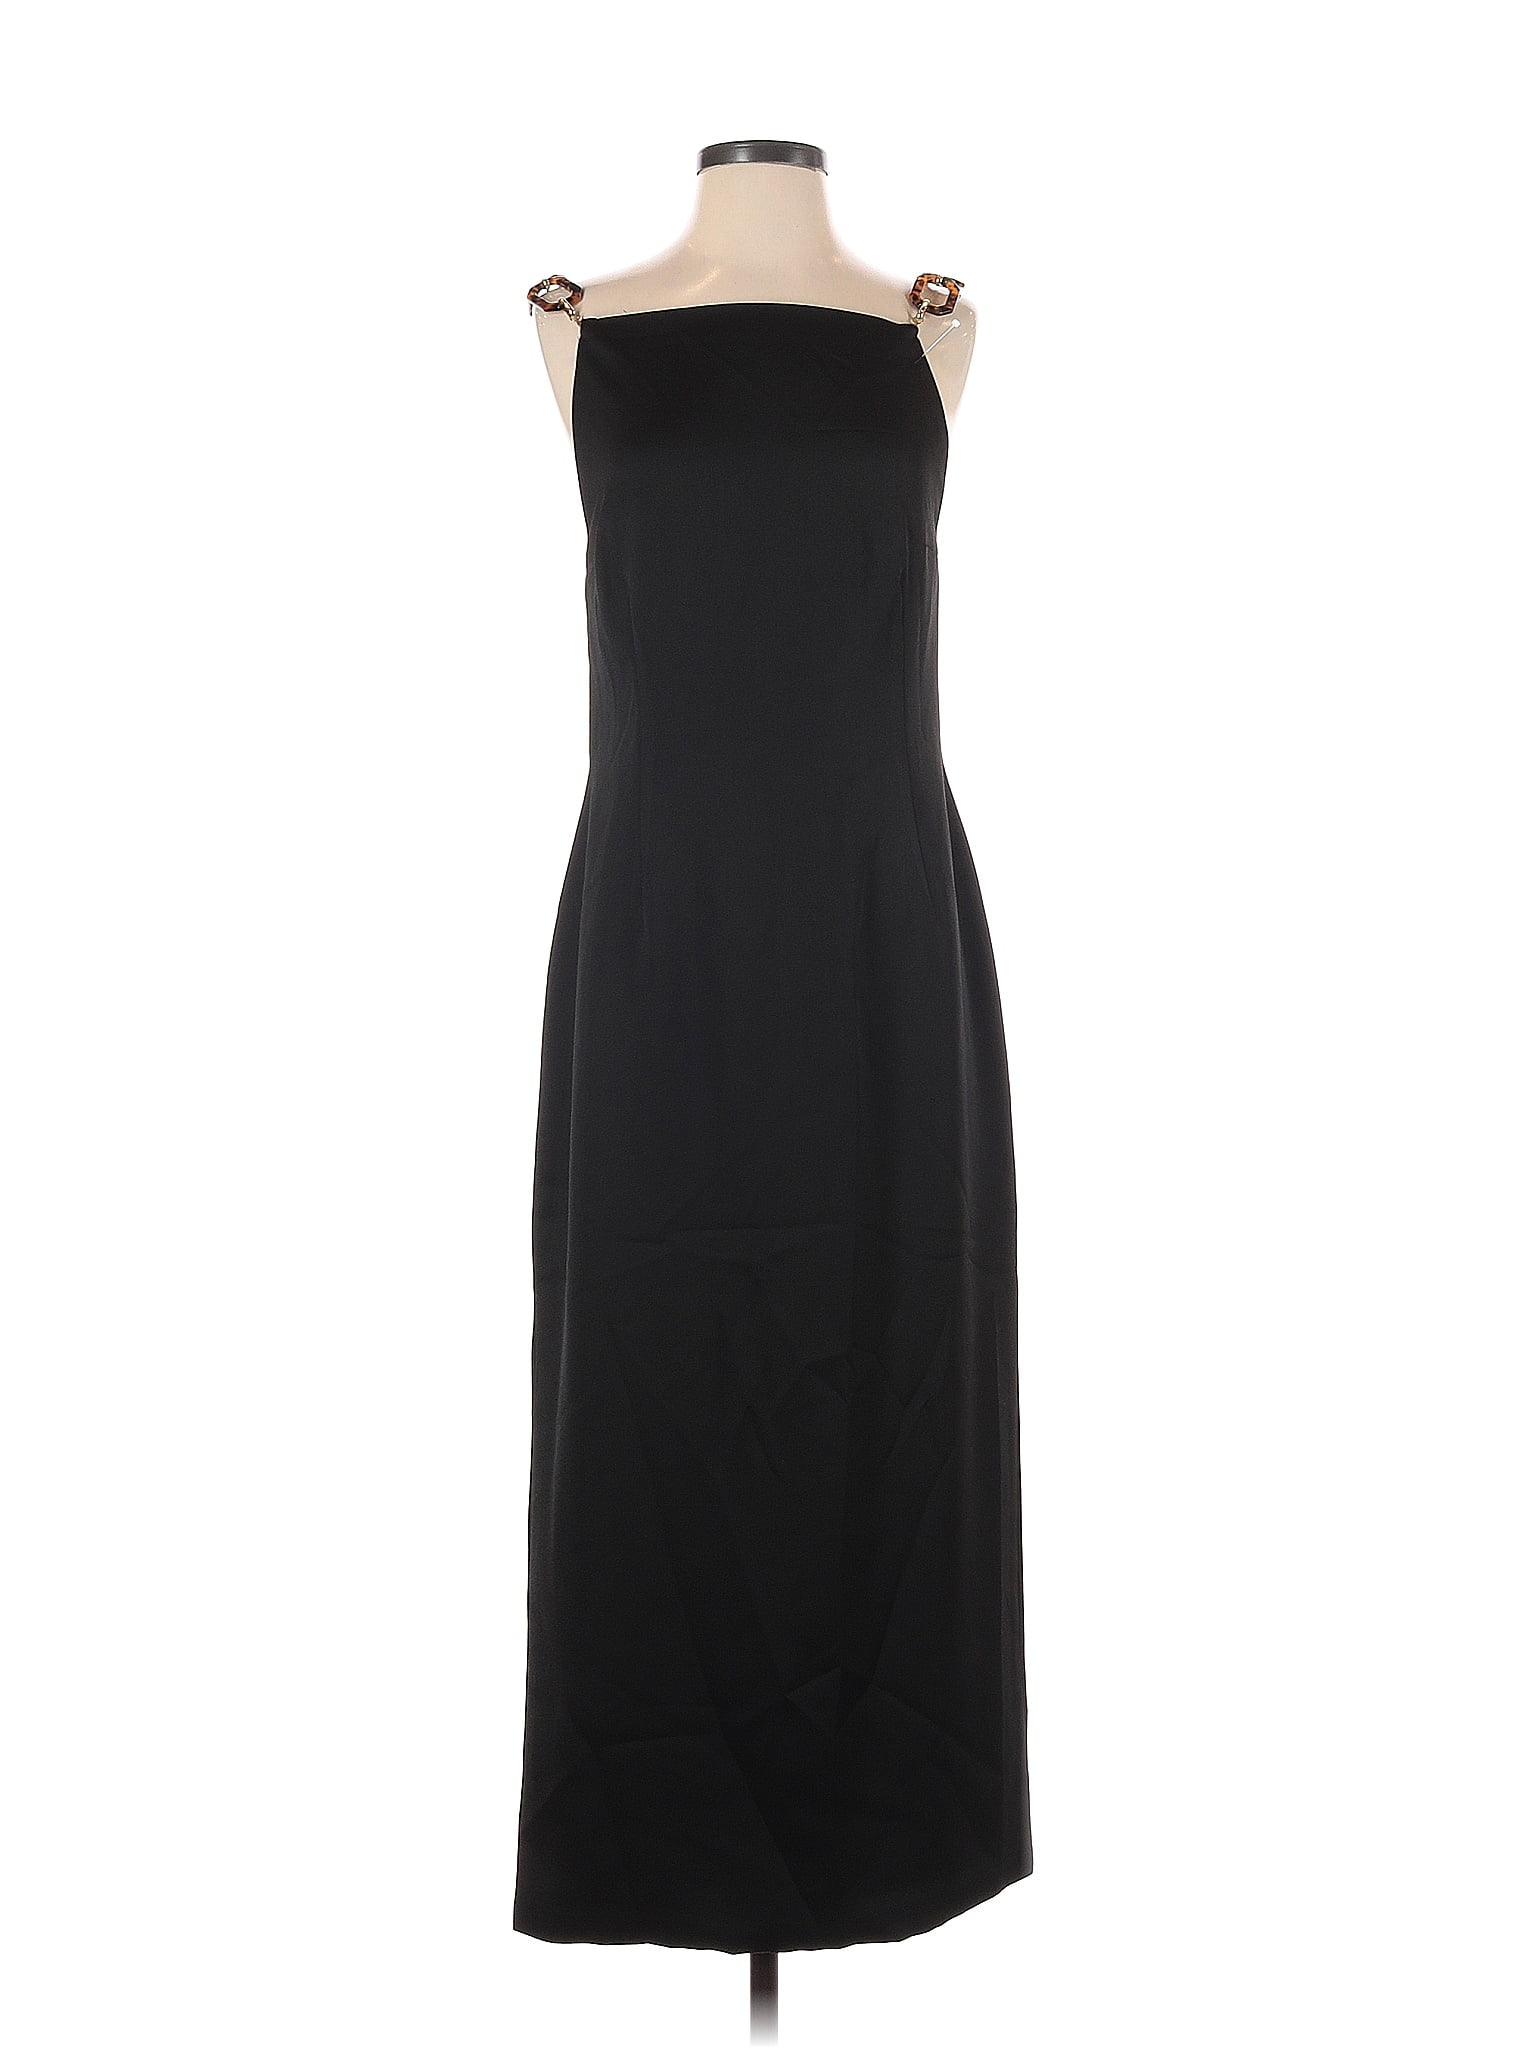 Cult Gaia 100% Polyester Solid Black Cocktail Dress Size S - 66% off ...